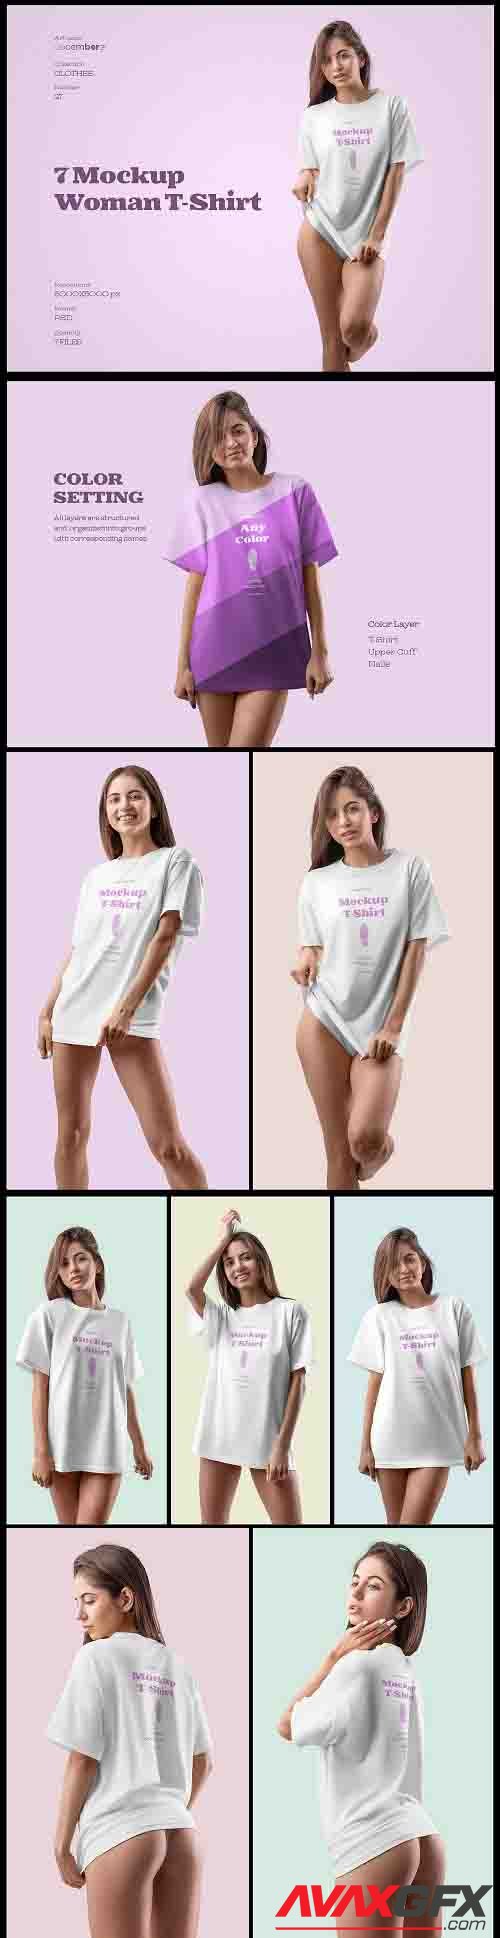 7 Mockups Woman T-Shirt Oversize » AVAXGFX - All Downloads that You Need in One Place! Graphic ...